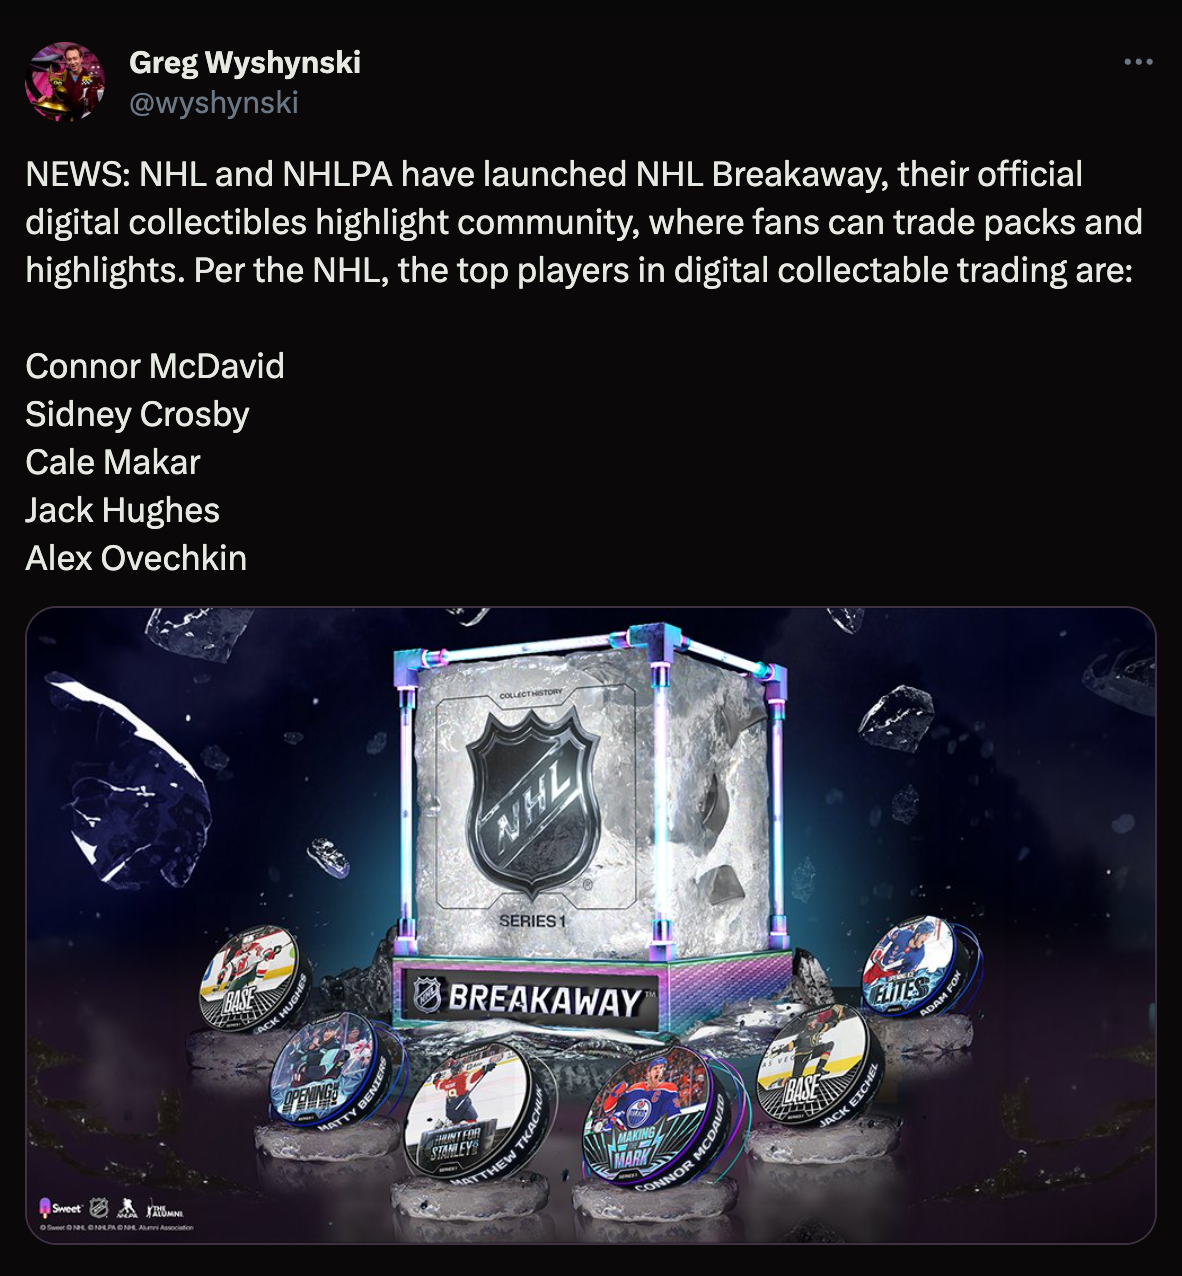 NEWS: NHL and NHLPA have launched NHL Breakaway, their official digital collectibles highlight community, where fans can trade packs and highlights. Per the NHL, the top players in digital collectable trading are:&10;&10;Connor McDavid&10;Sidney Crosby&10;Cale Makar&10;Jack Hughes&10;Alex Ovechkin